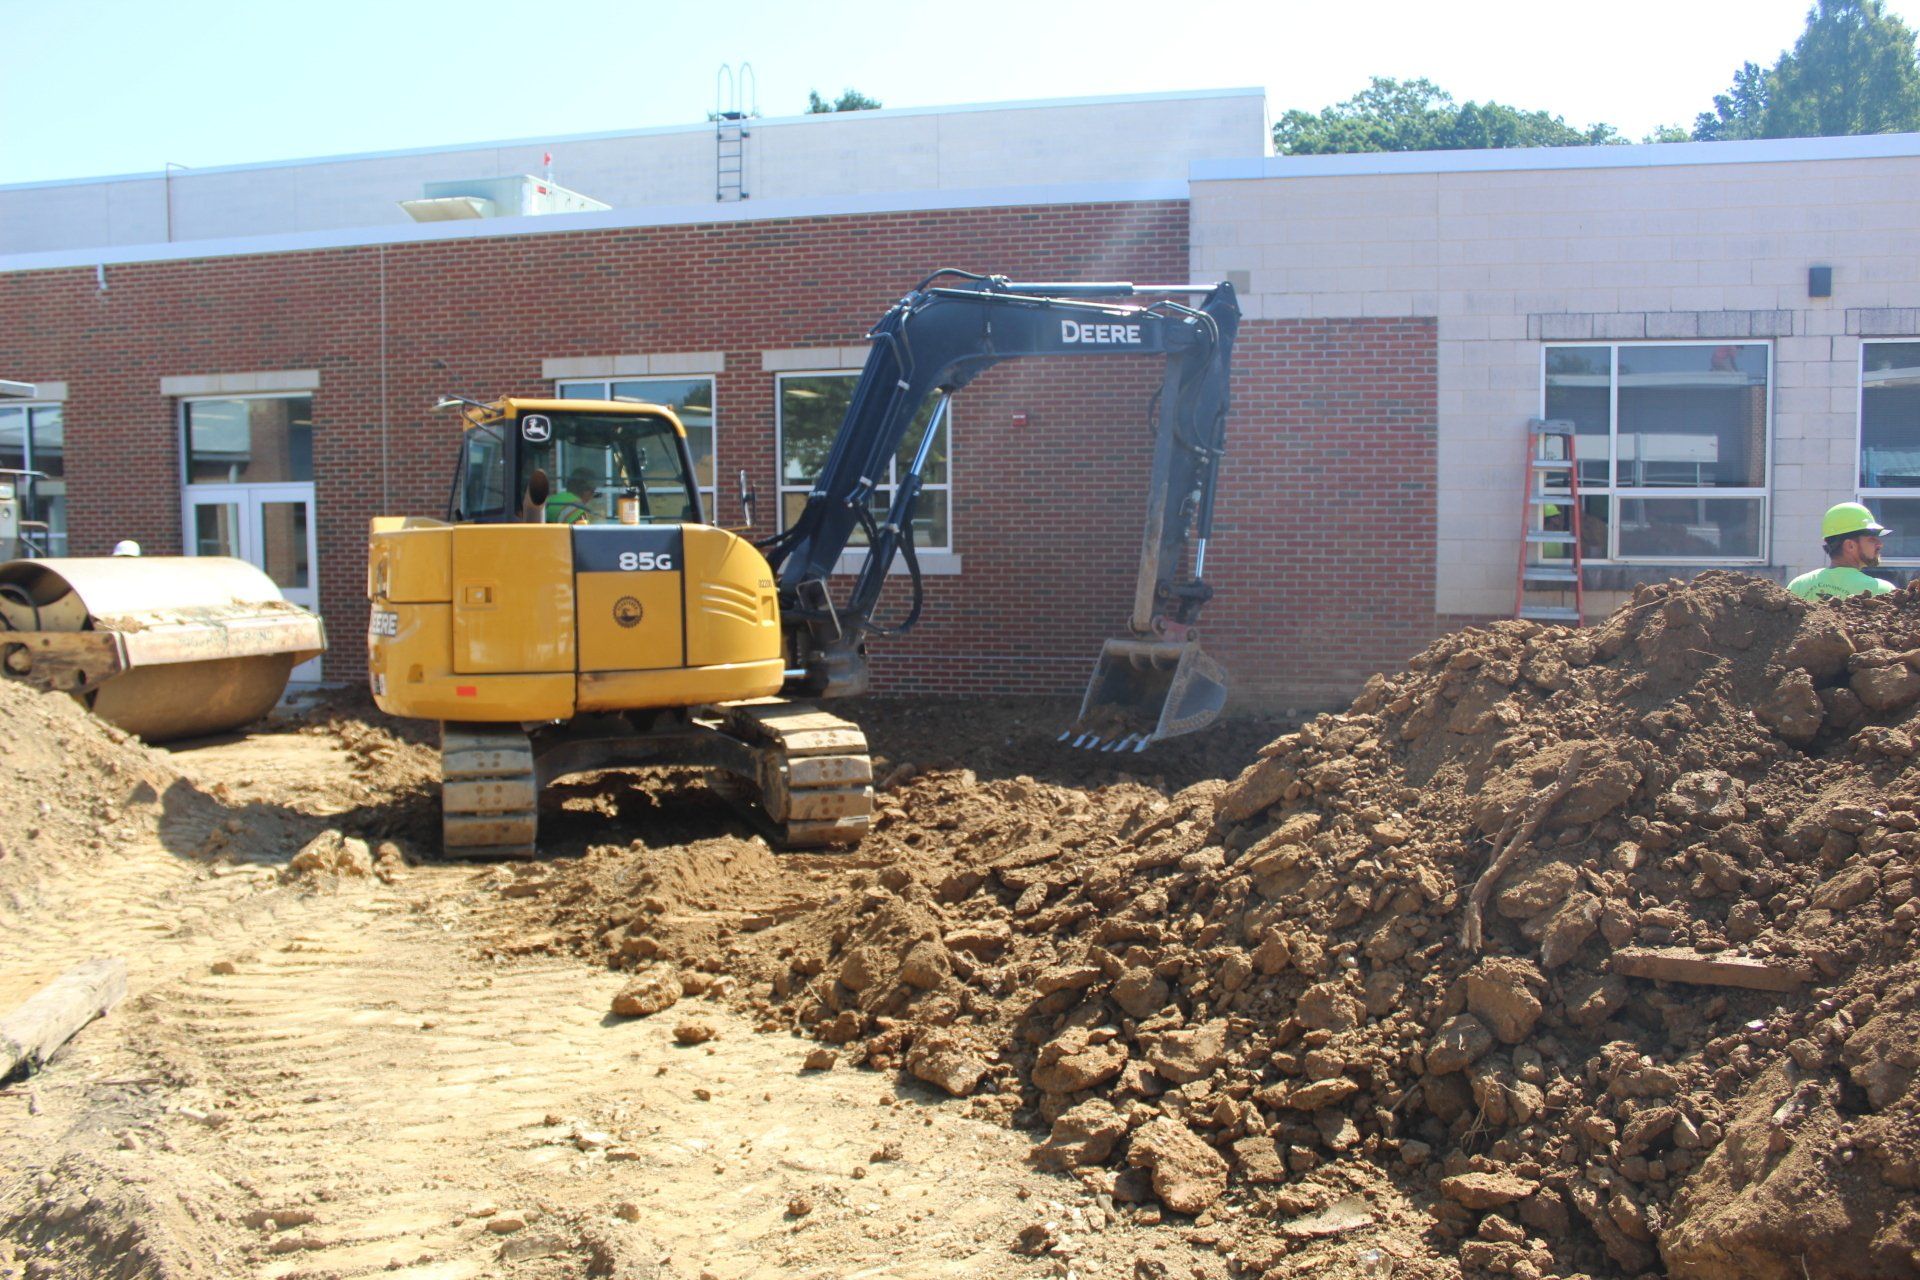 A yellow deere excavator is moving dirt in front of a brick building